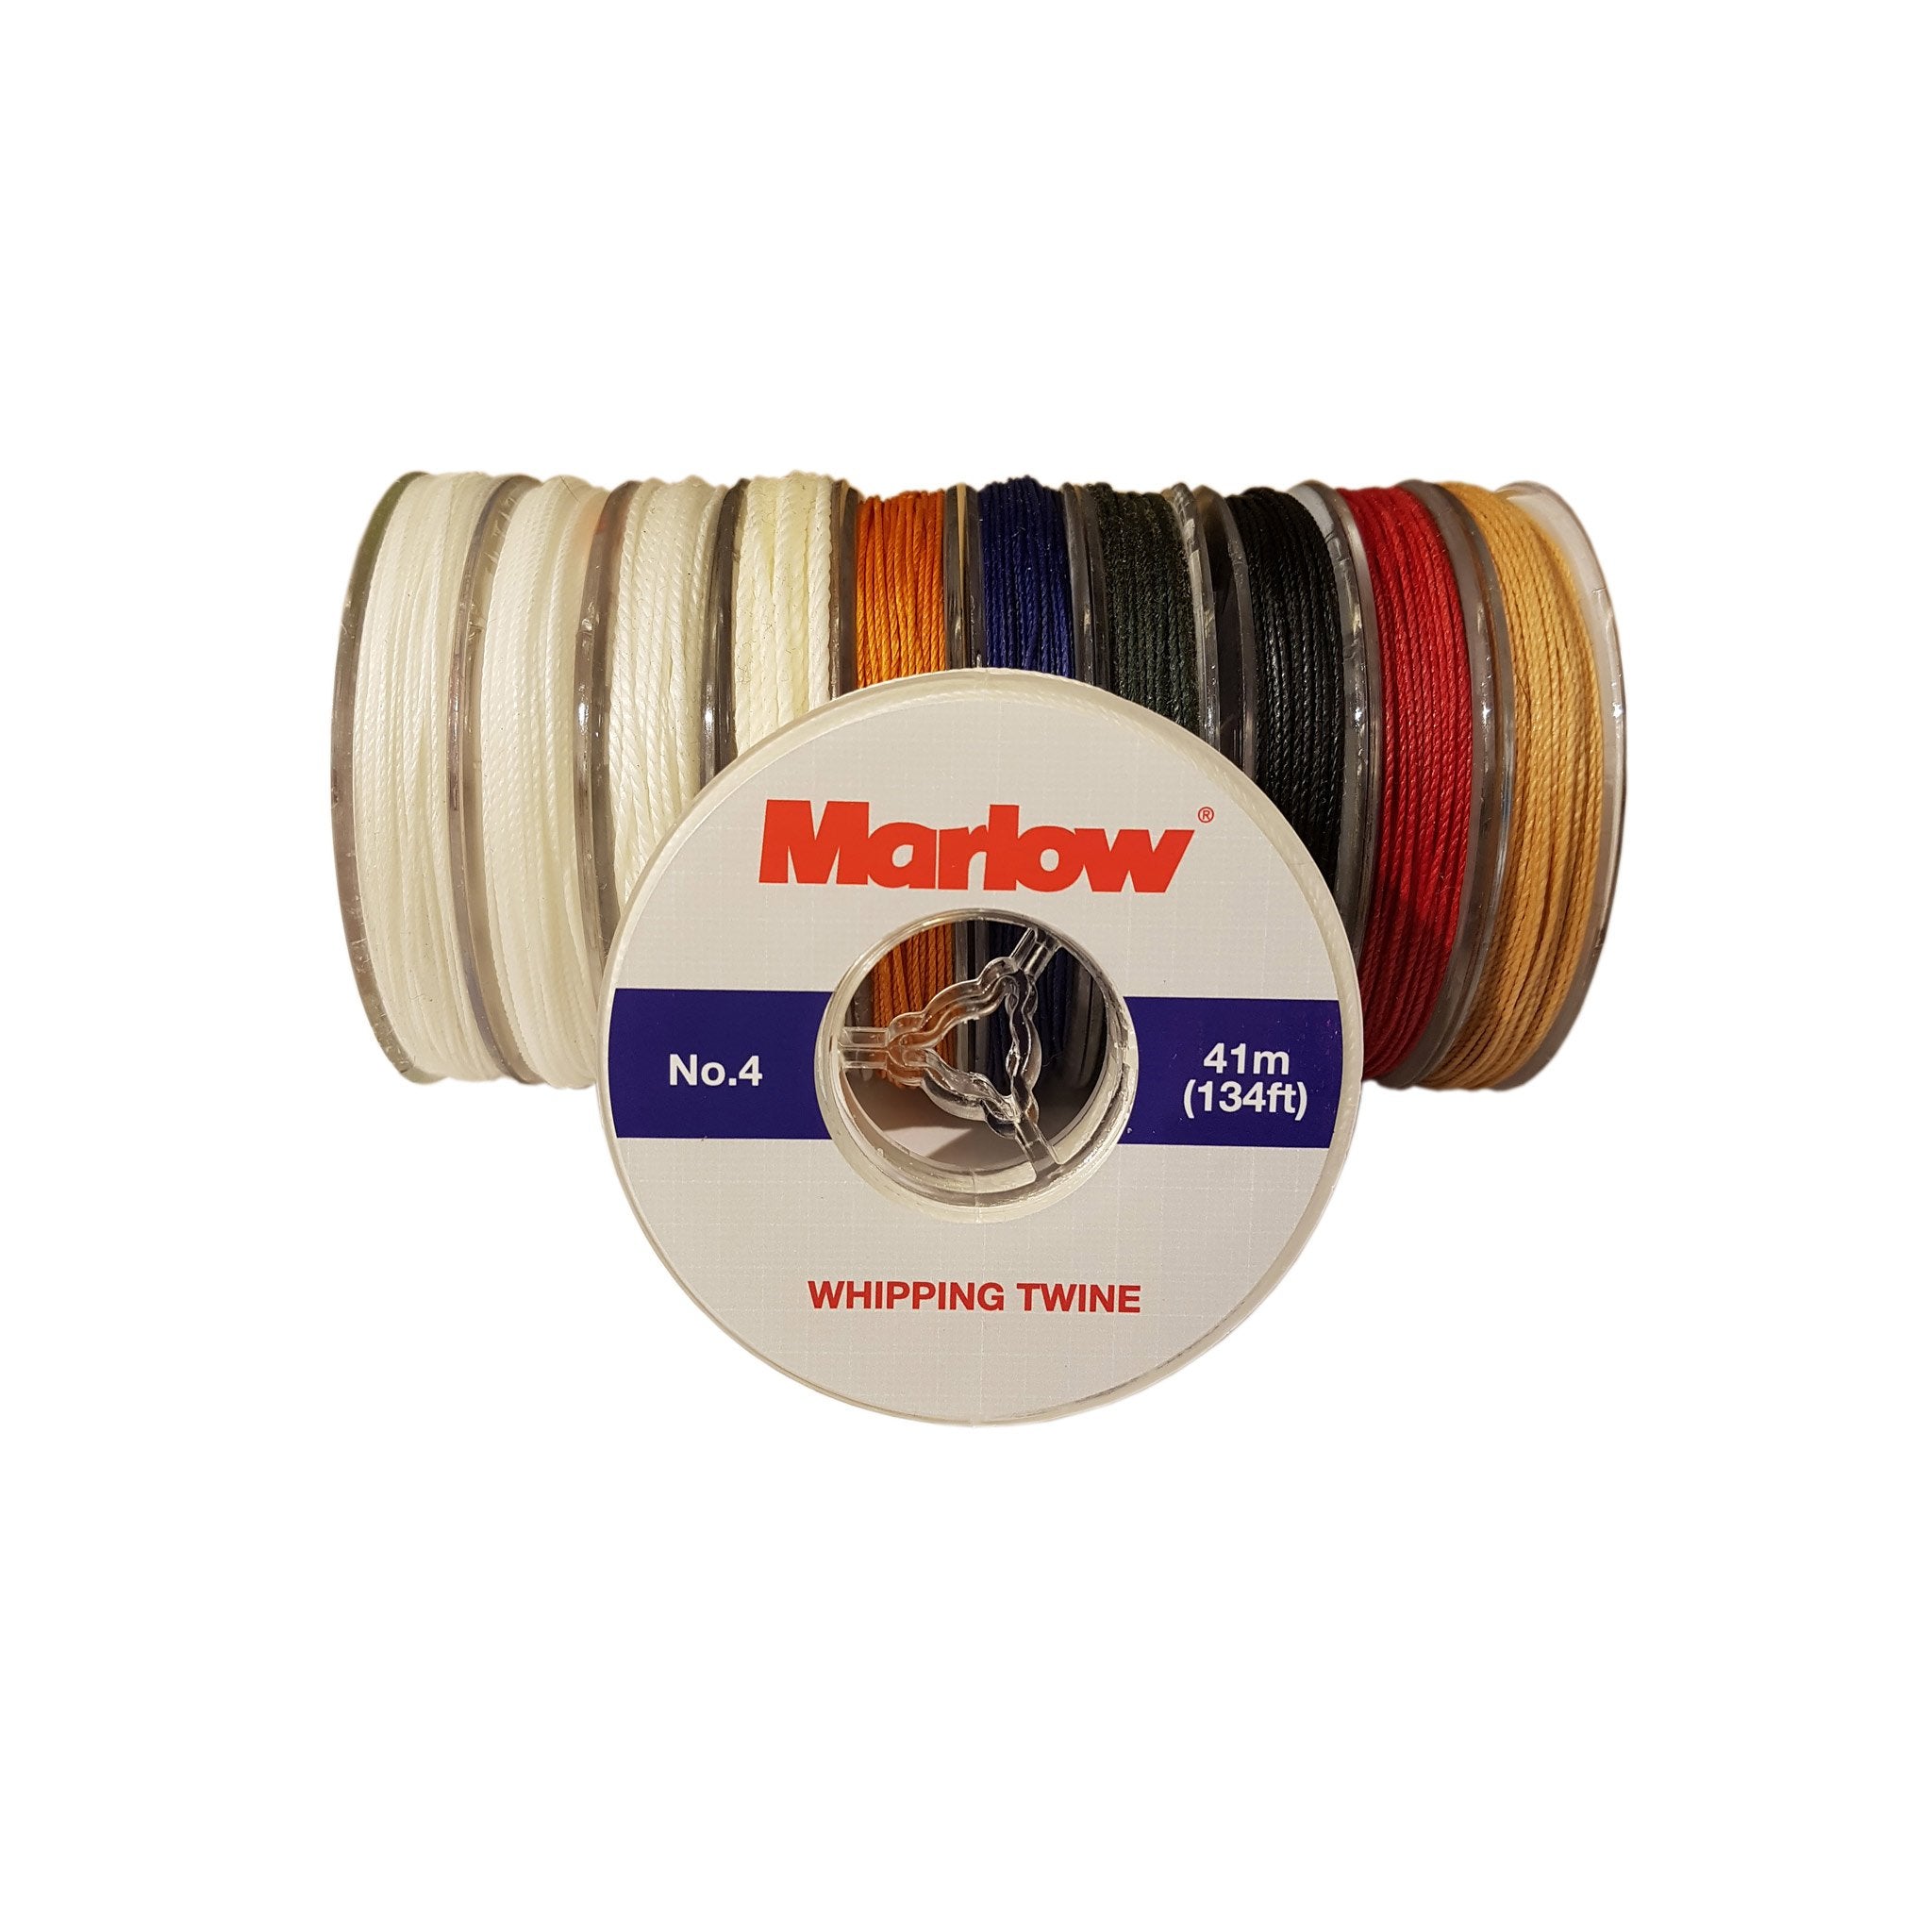 SGT Knots - Marlow Wax Polyester Whipping Twine #4 - for Rope Splice,  Whipping Ropes, Sail Twine, General Utility - (134FT) Red